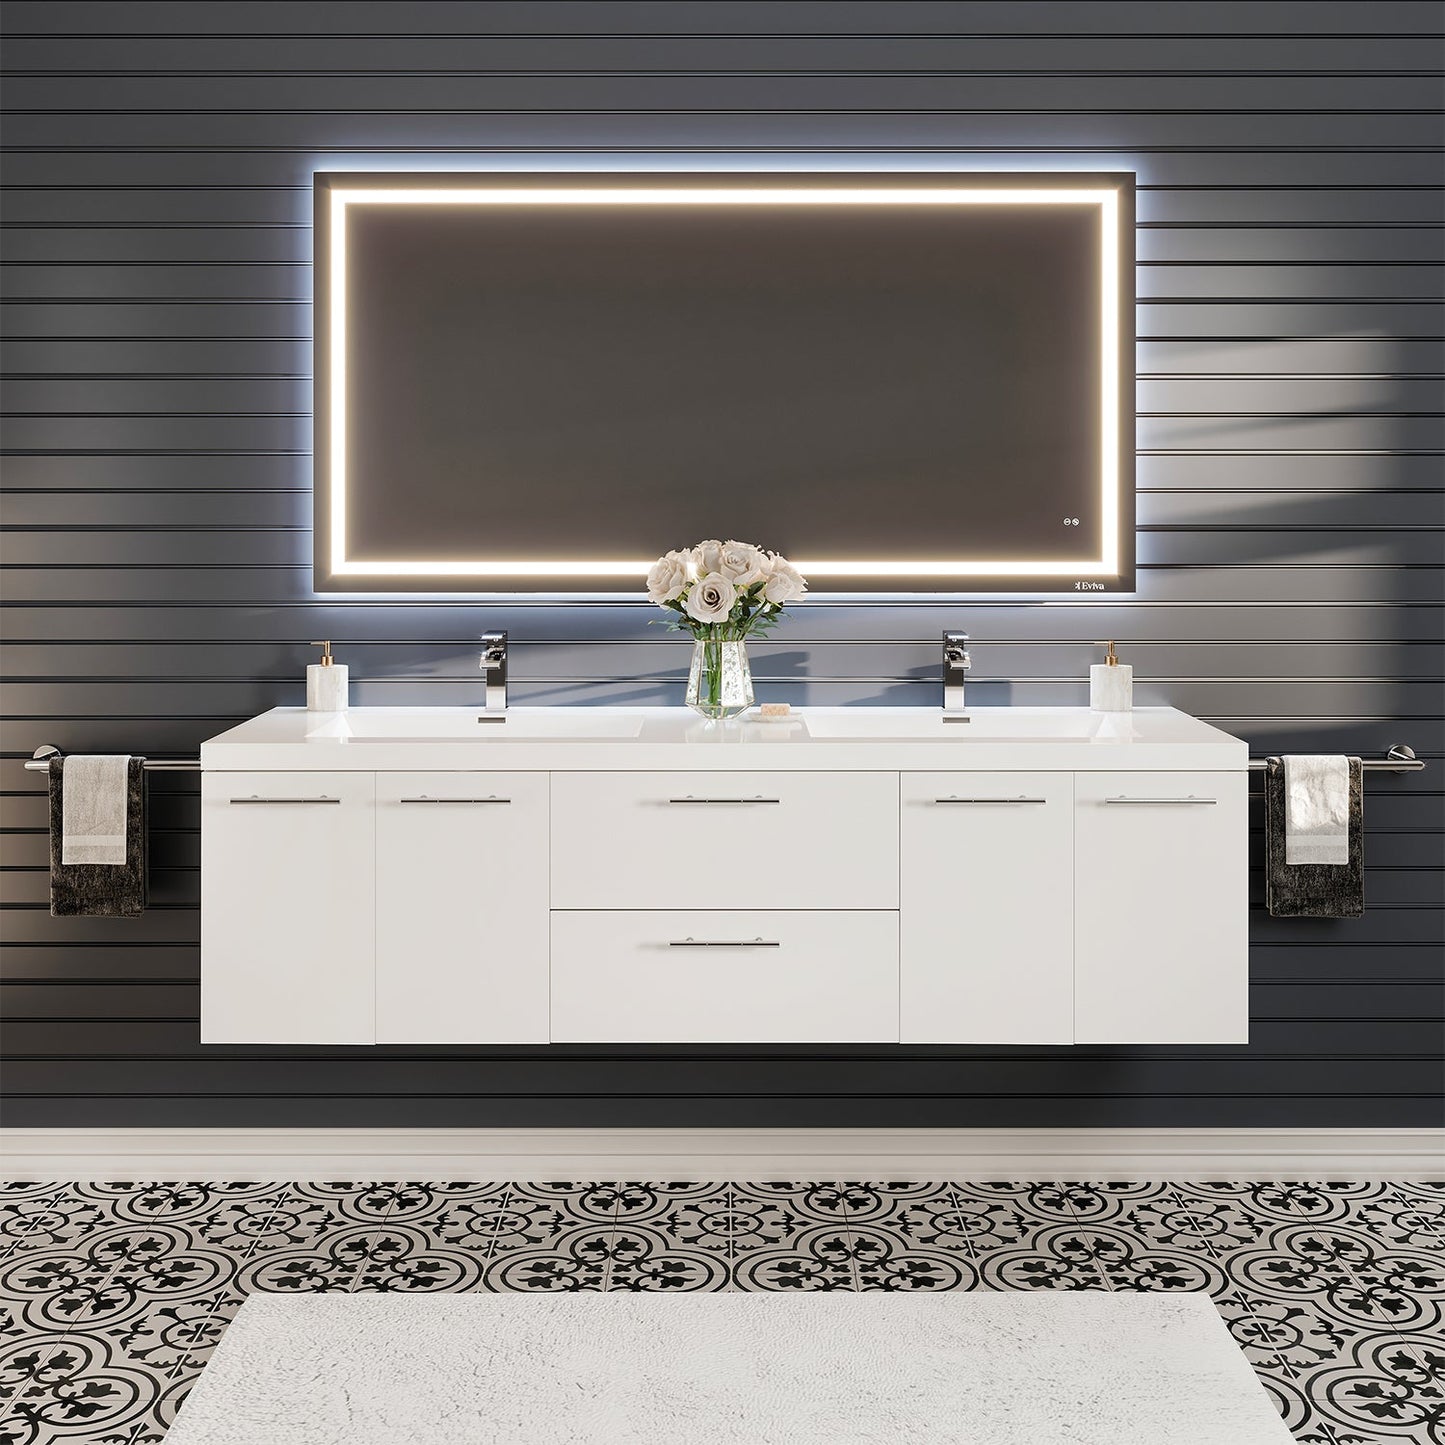 Axis 71"W x 20"D White Double Sink Bathroom Vanity with Acrylic Countertop and Integrated Sink